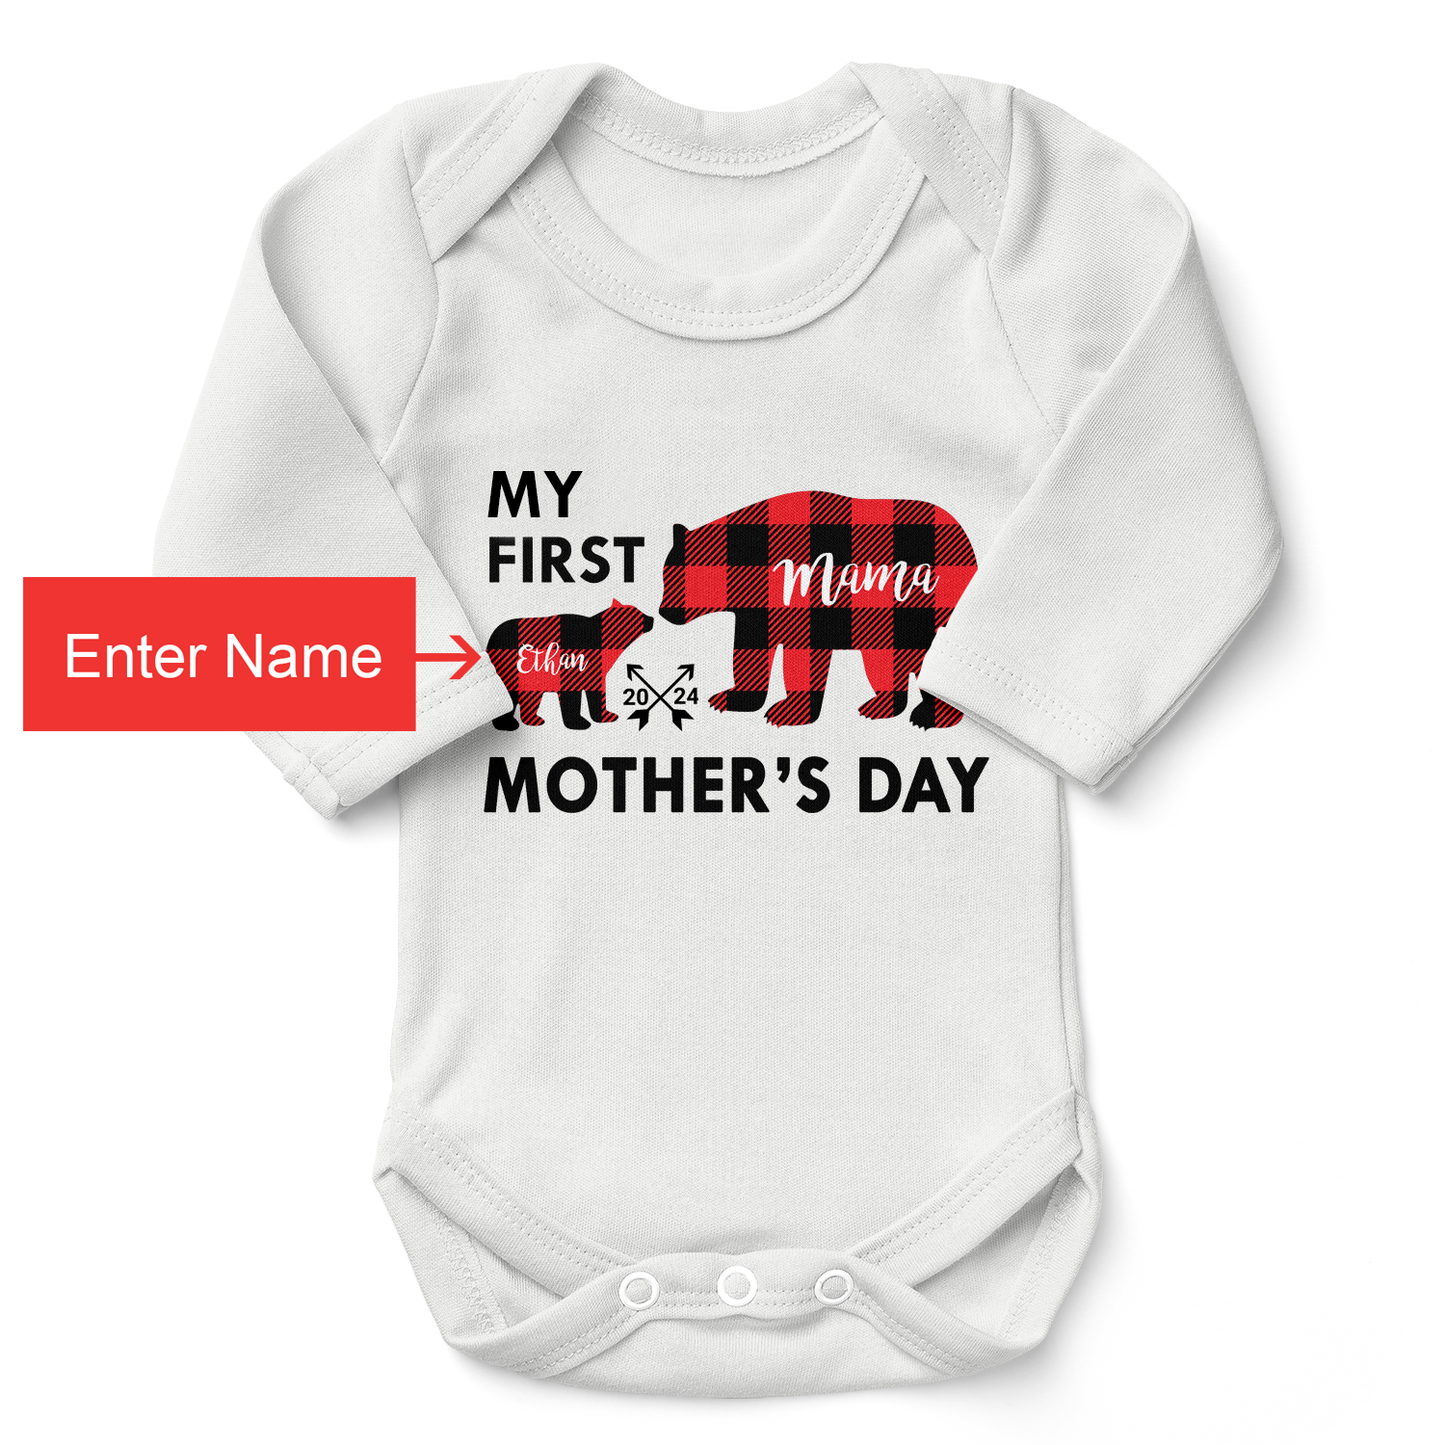 [Personalized] Endanzoo Organic Baby Bodysuit - My First Mother's Day 2024